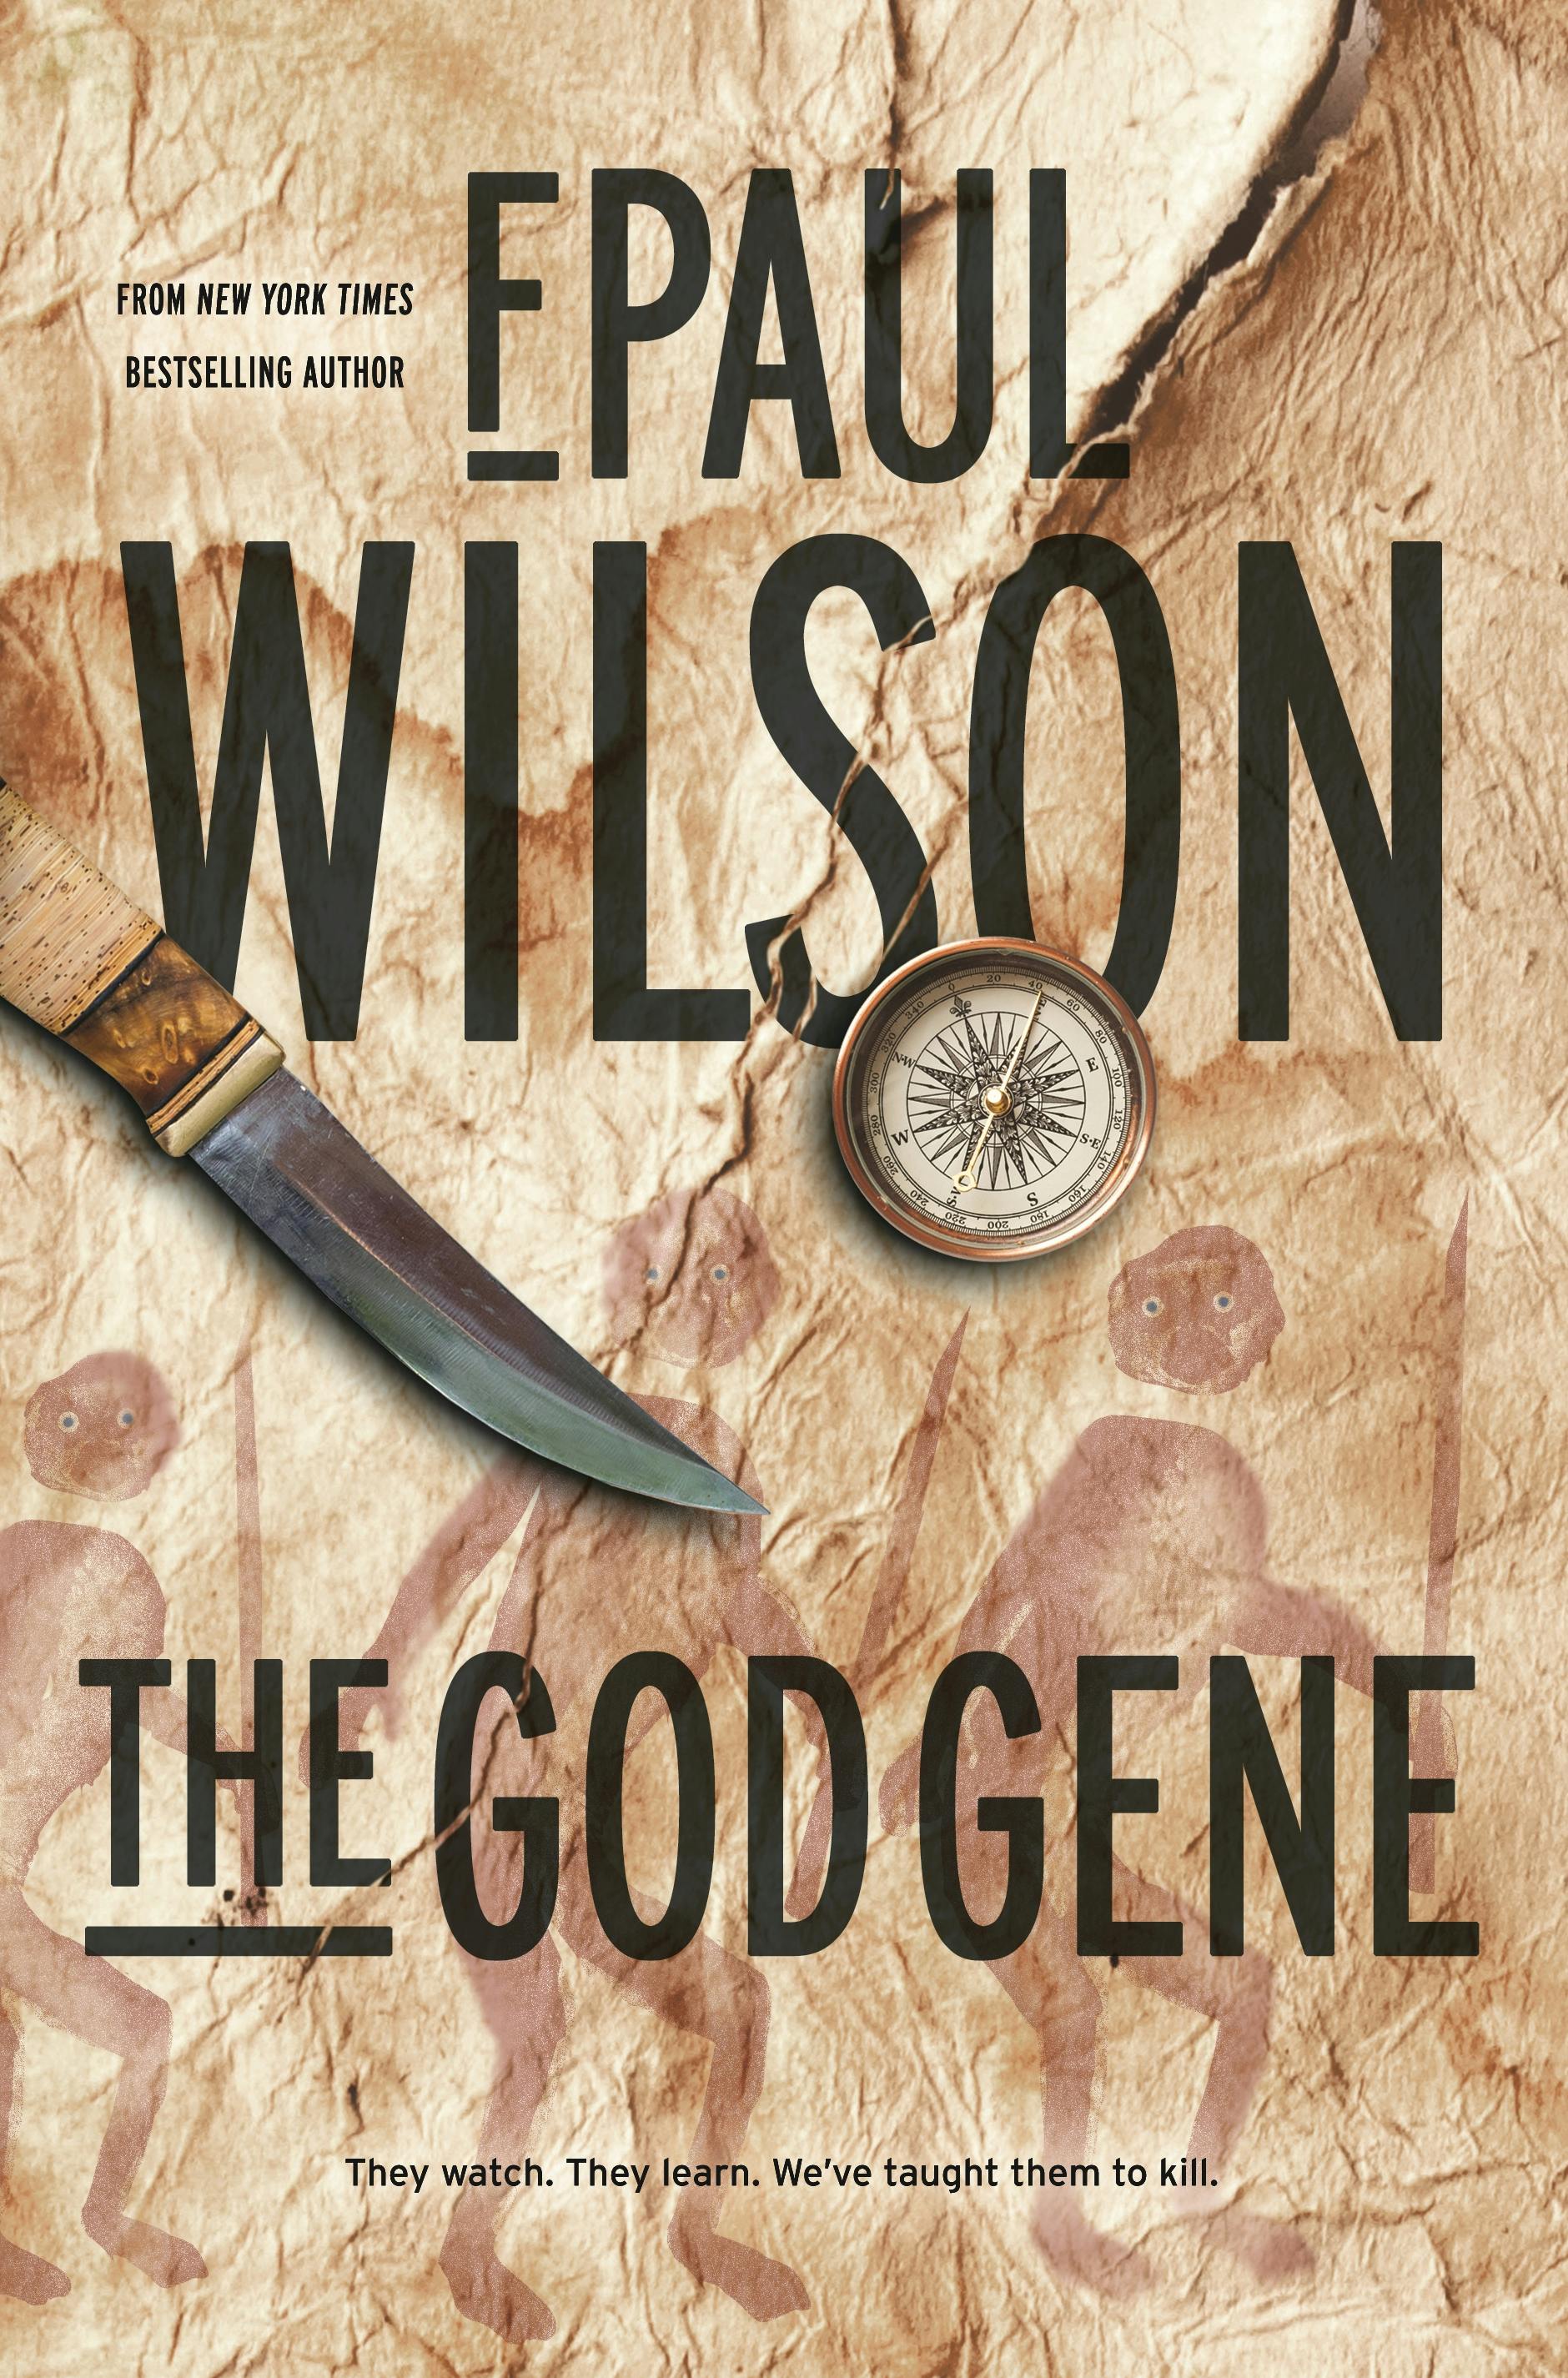 Cover for the book titled as: The God Gene